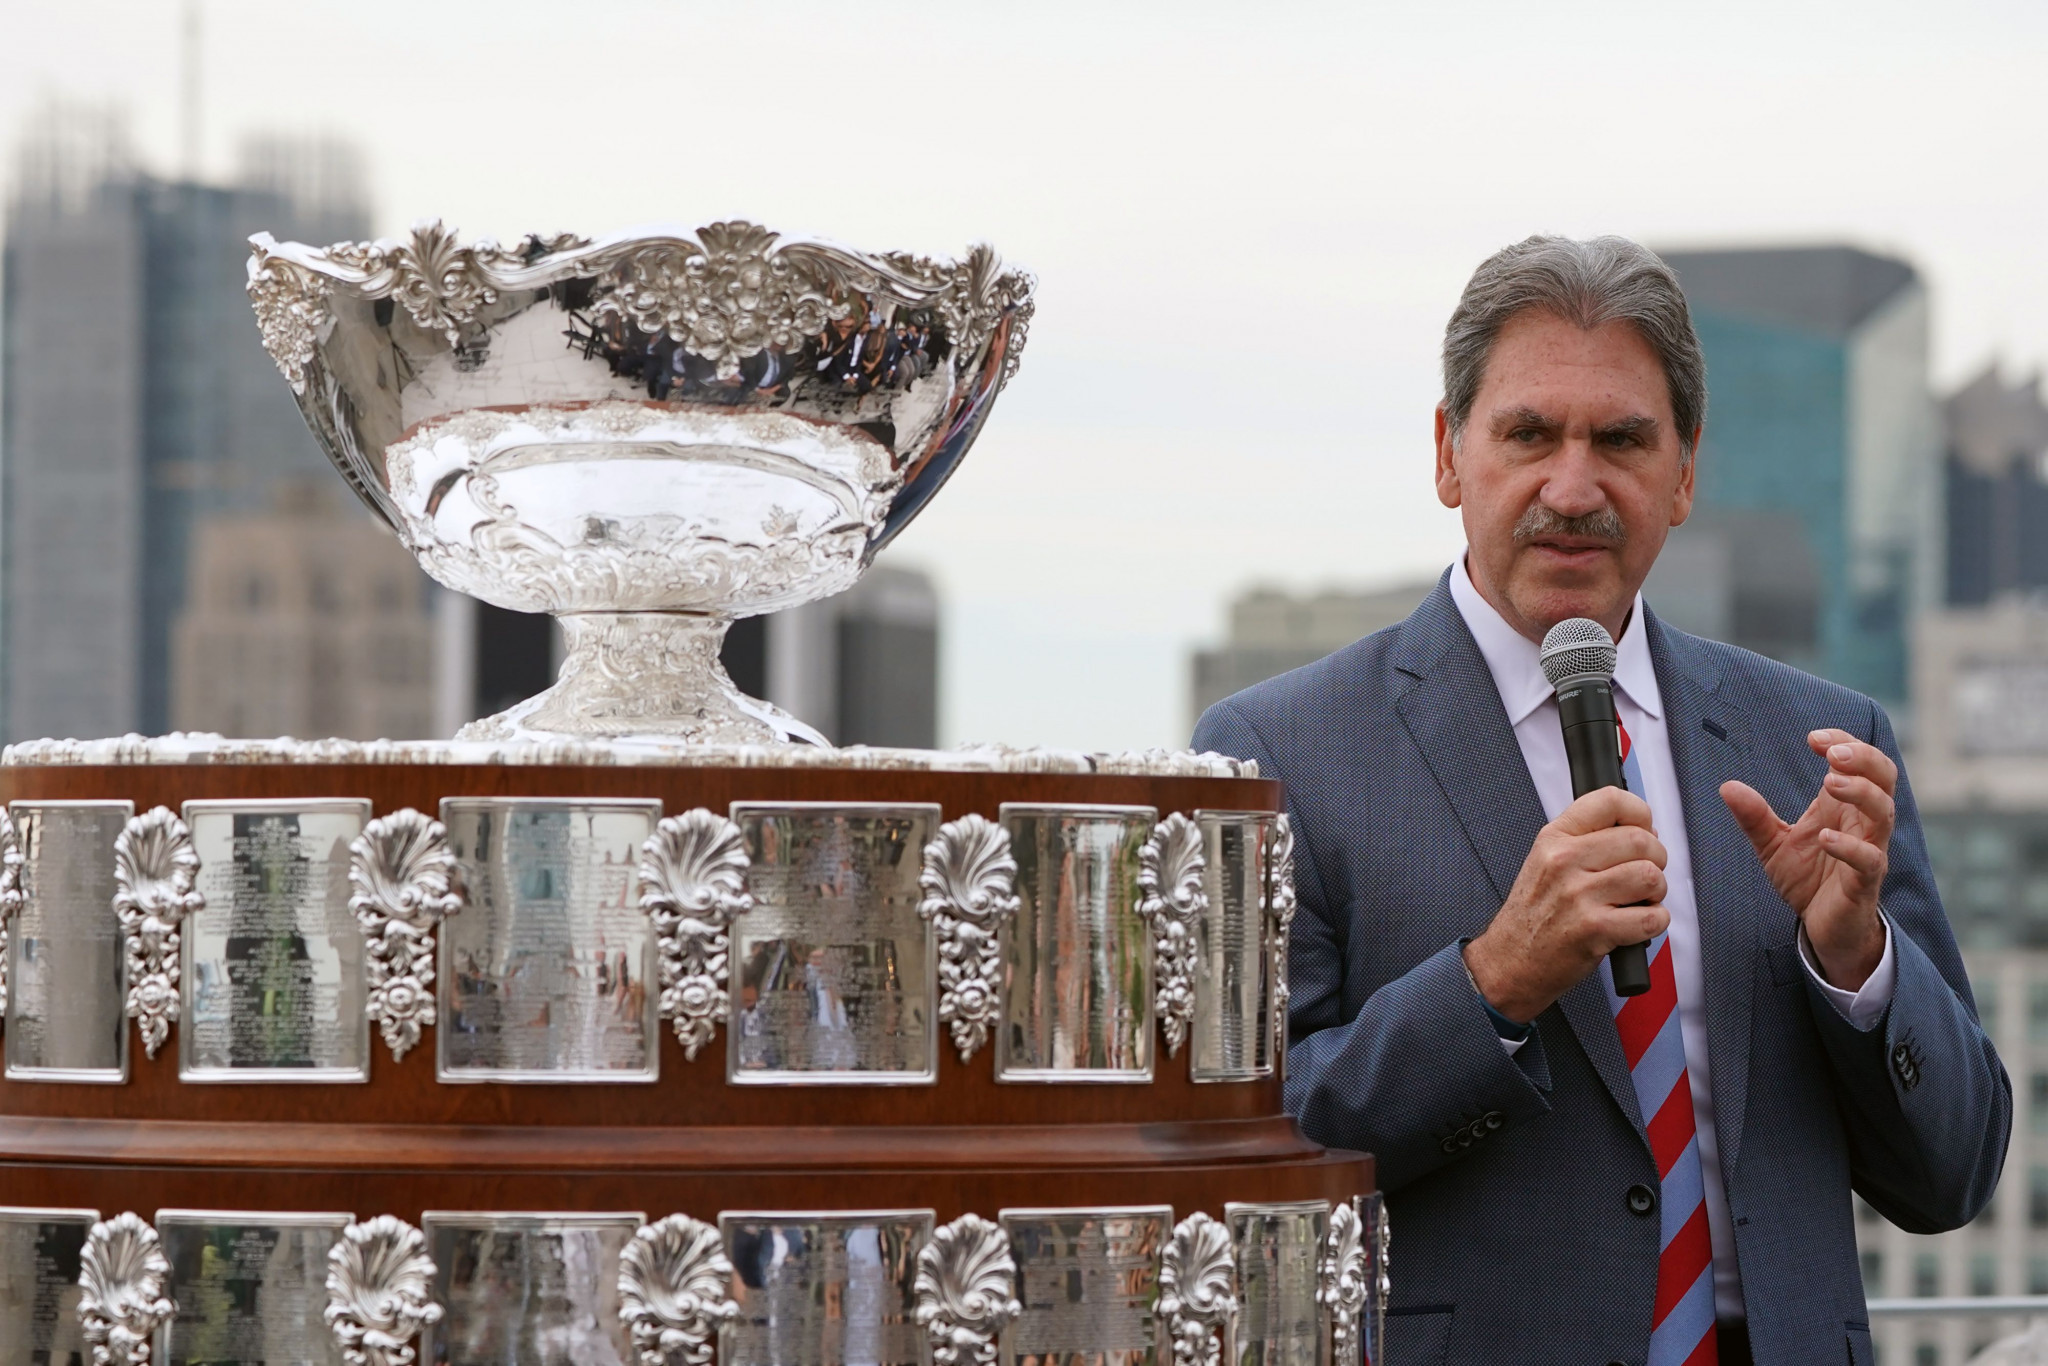 David Haggerty will seek a second term as ITF President ©Getty Images